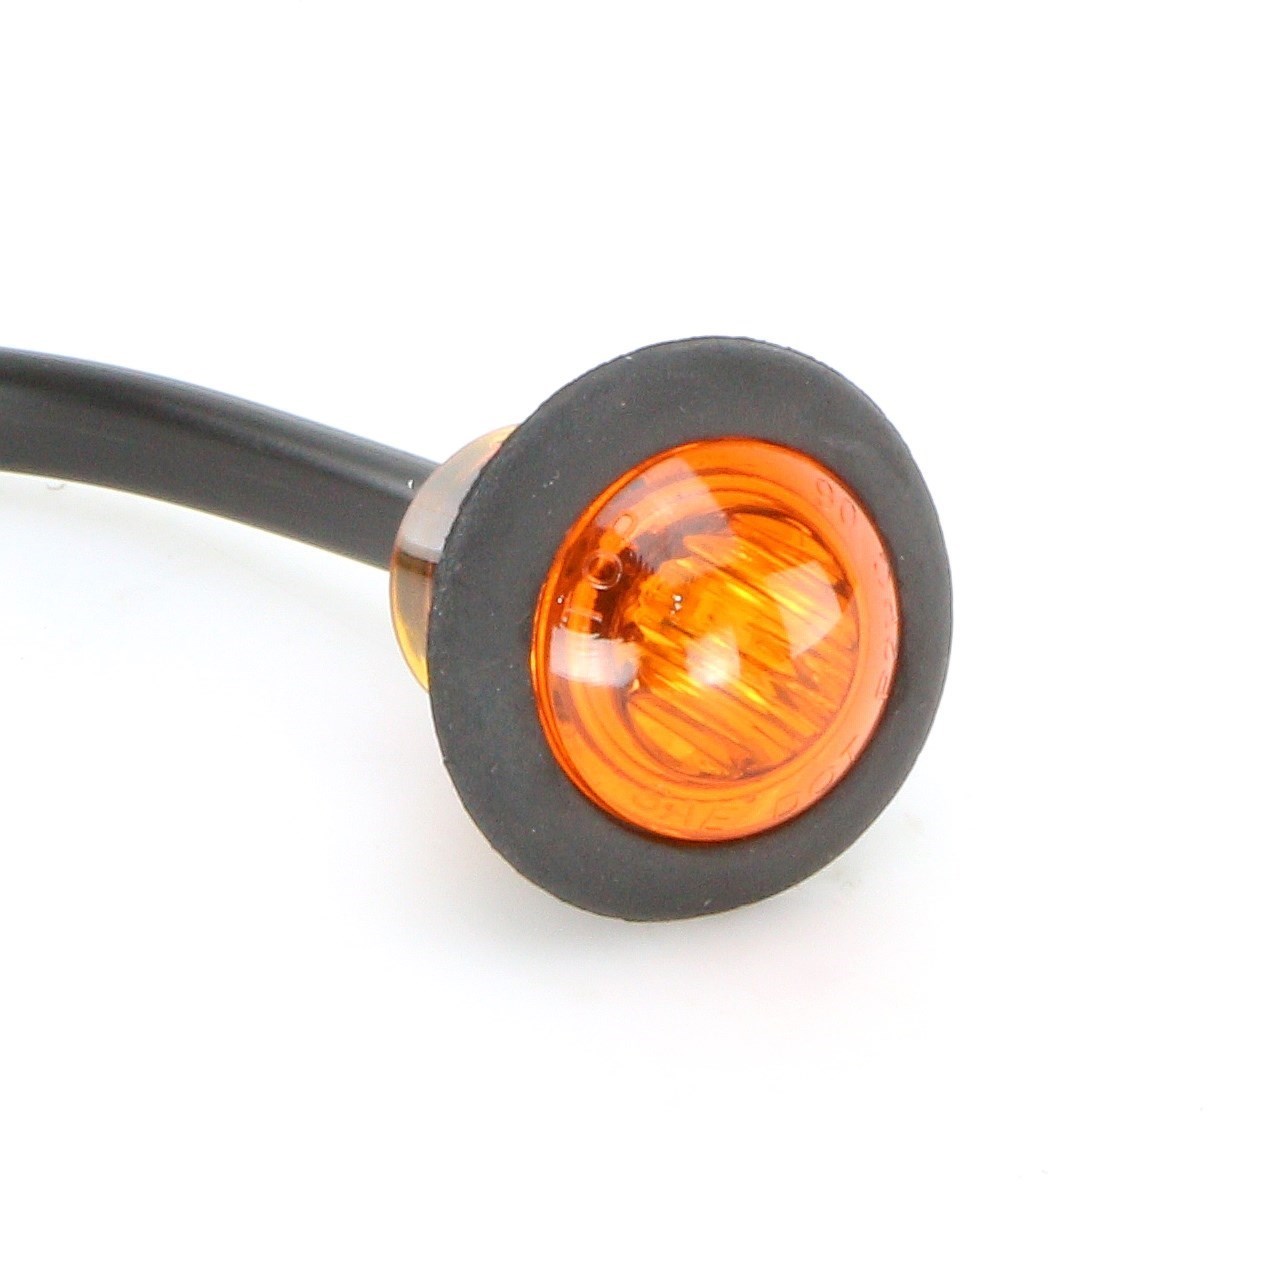 https://www.carbuilder.com/images/thumbs/003/0030613_micro-28mm-round-push-in-led-side-repeaters-pair.jpeg